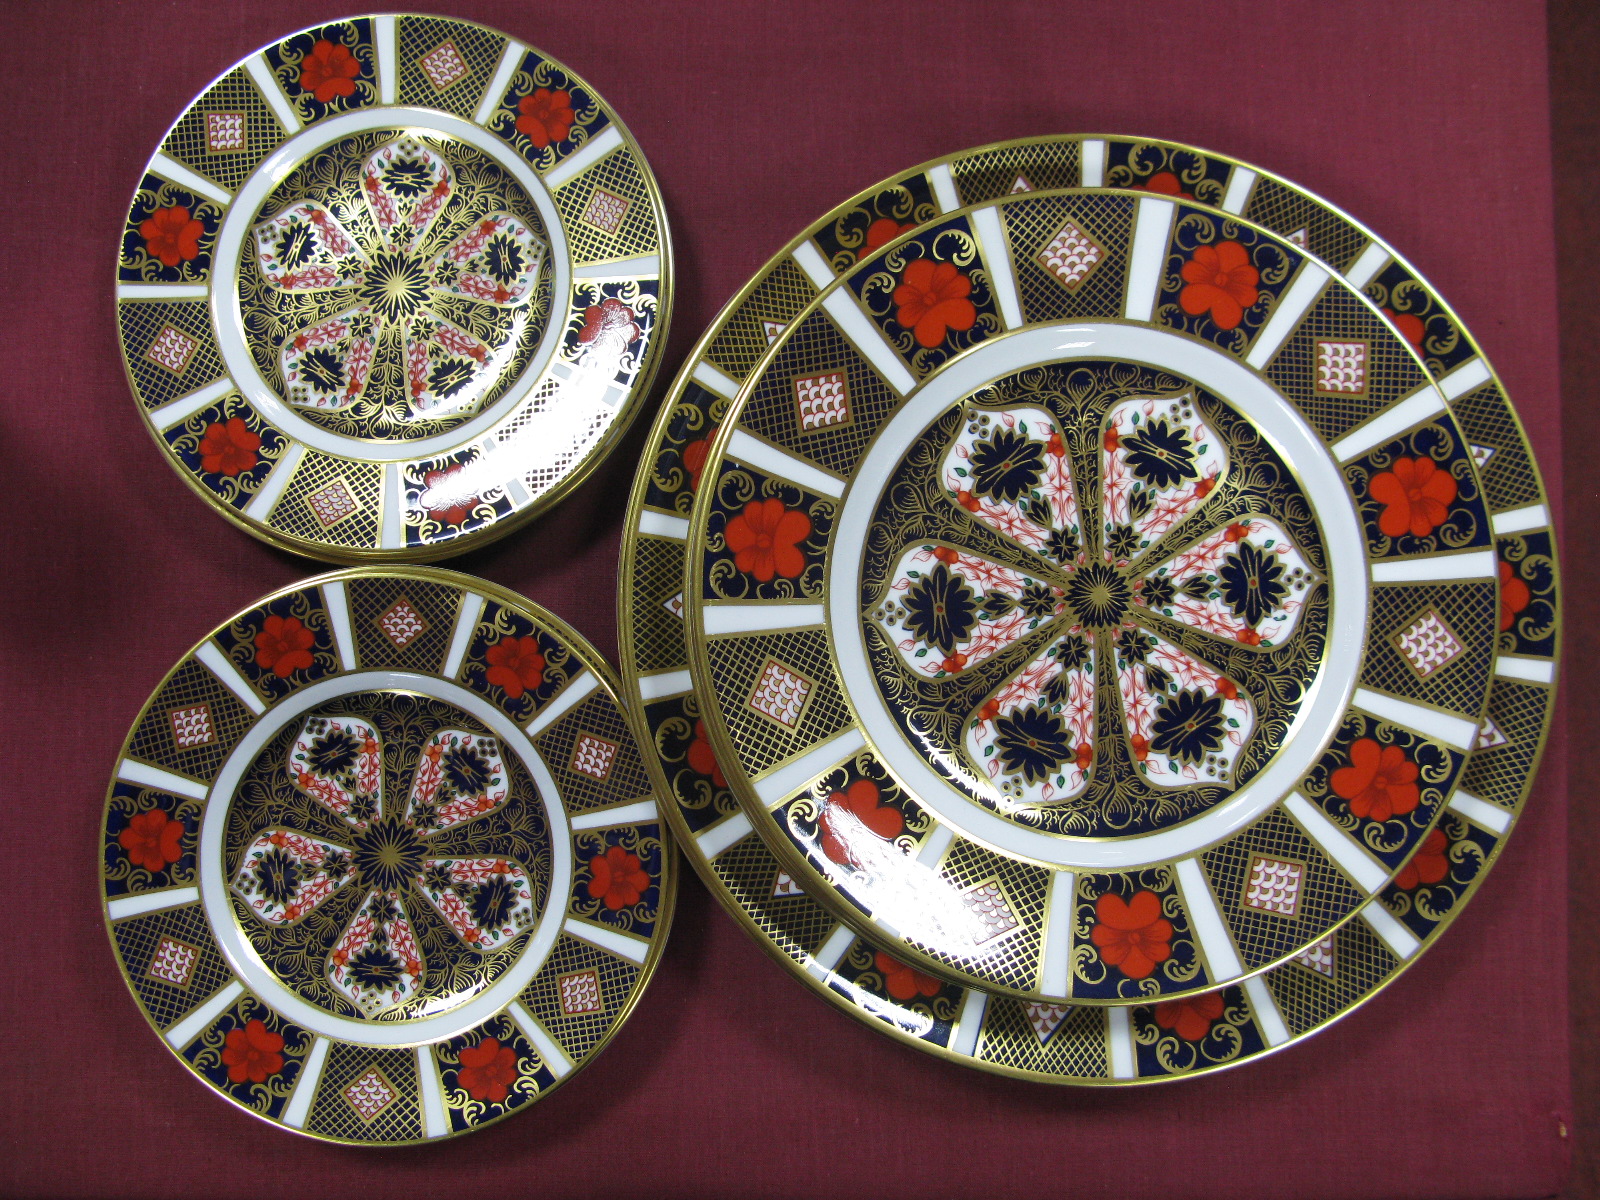 A Pair of Royal Crown Derby Porcelain Plates, decorated in Imari pattern 1128, date code for 1980,